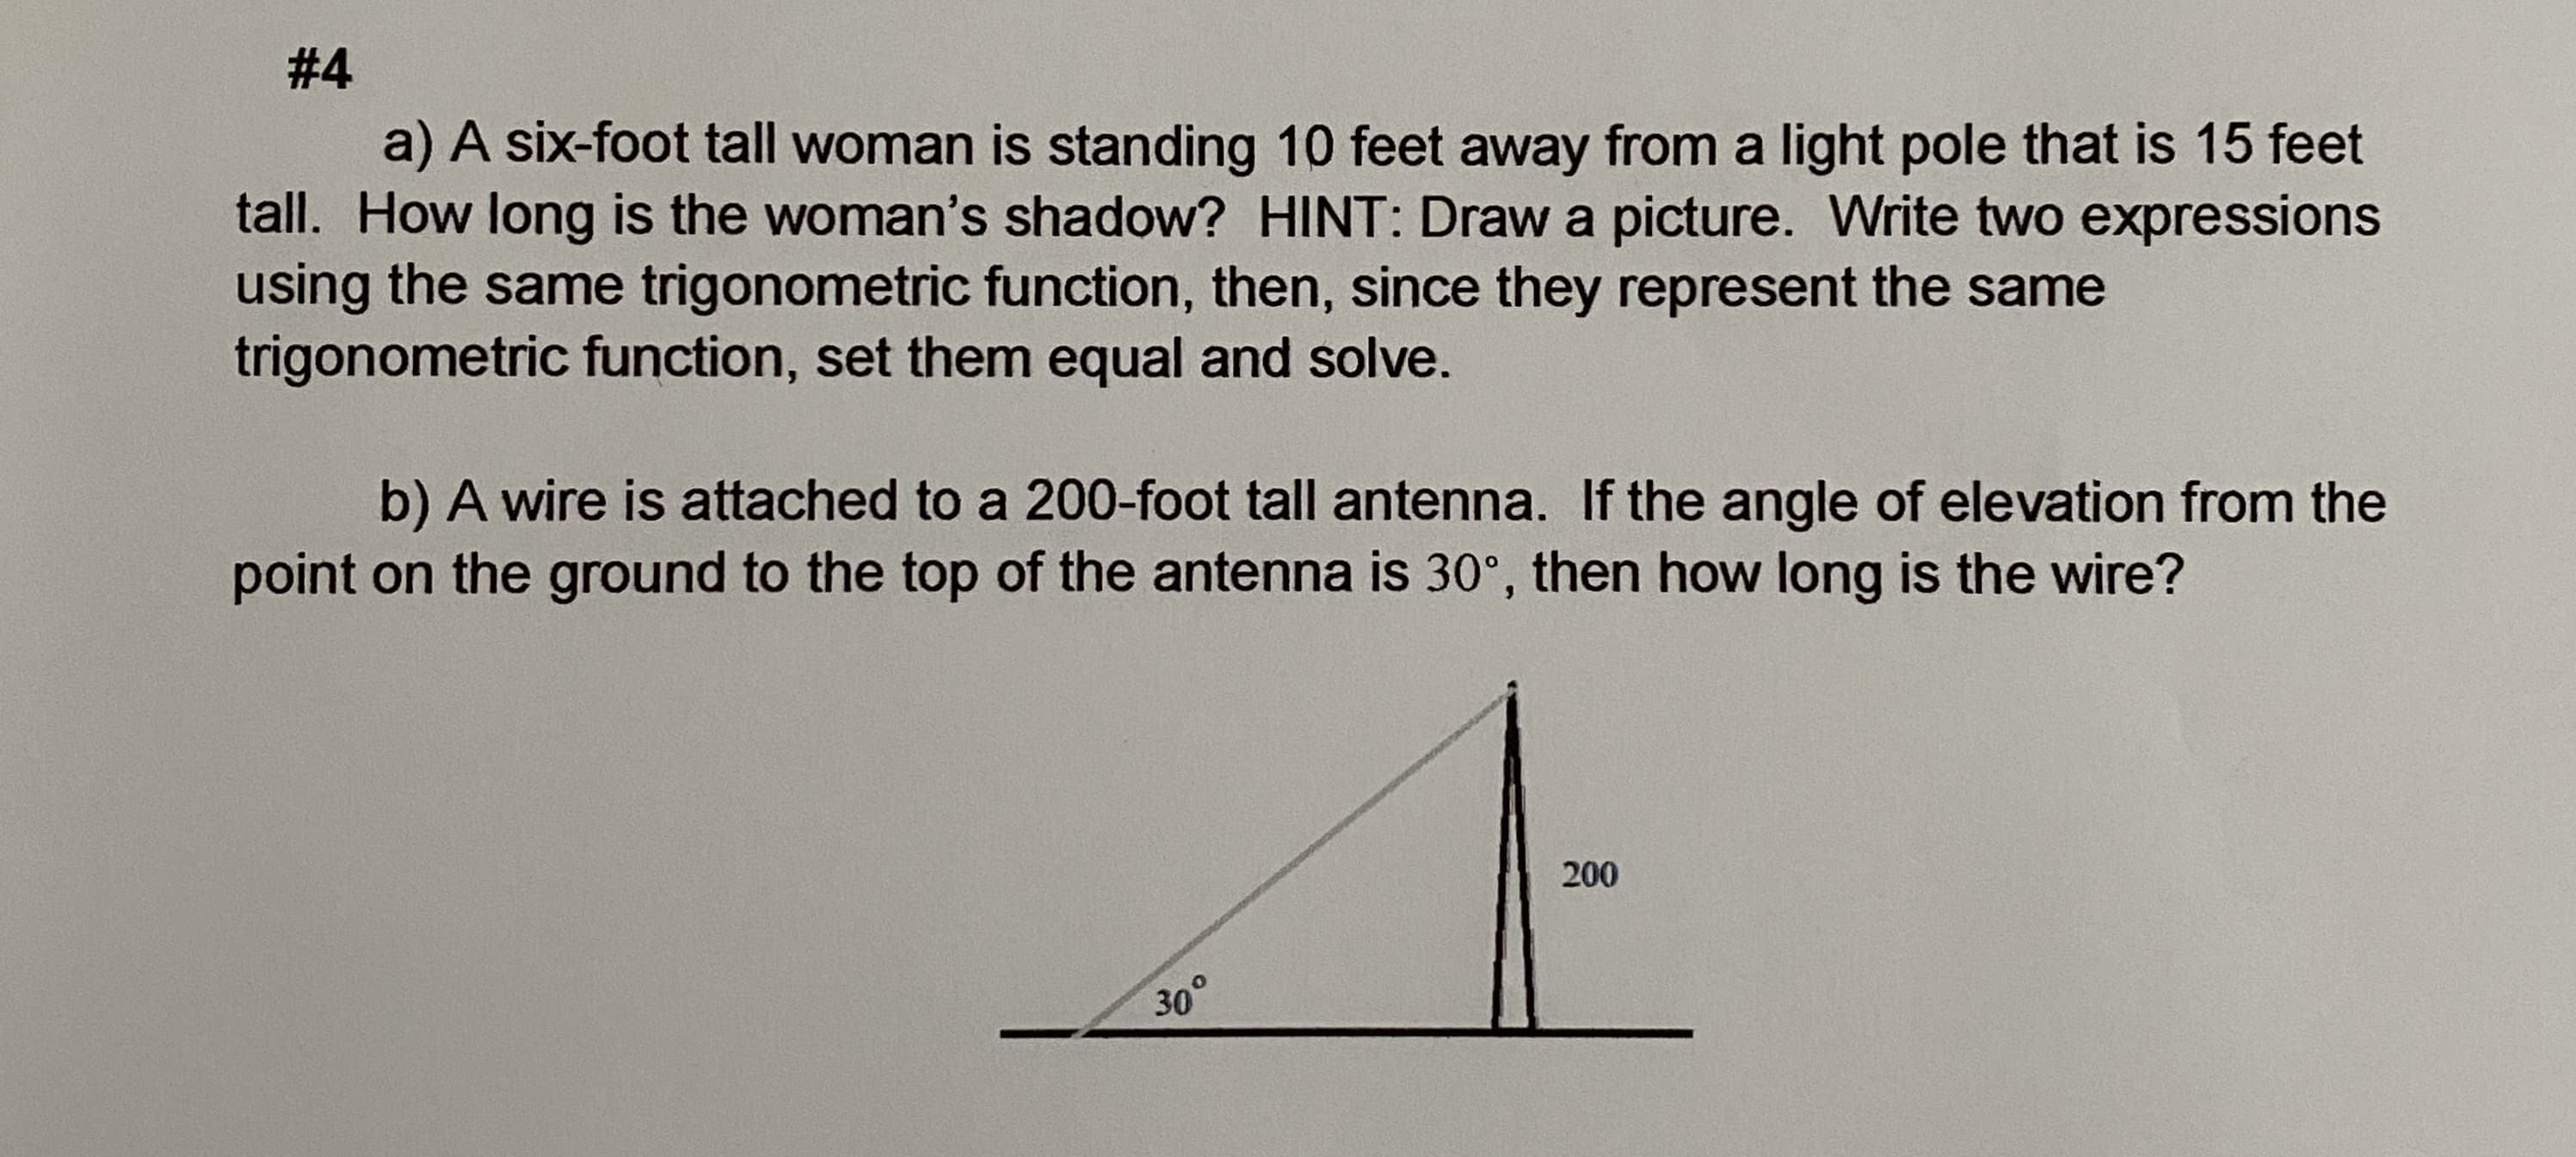 a) A six-foot tall woman is standing 10 feet away from a light pole that is 15 feet
tall. How long is the woman's shadow? HINT: Draw a picture. Write two expressions
using the same trigonometric function, then, since they represent the same
trigonometric function, set them equal and solve.
b) A wire is attached to a 200-foot tall antenna. If the angle of elevation from the
point on the ground to the top of the antenna is 30°, then how long is the wire?
200
30°
